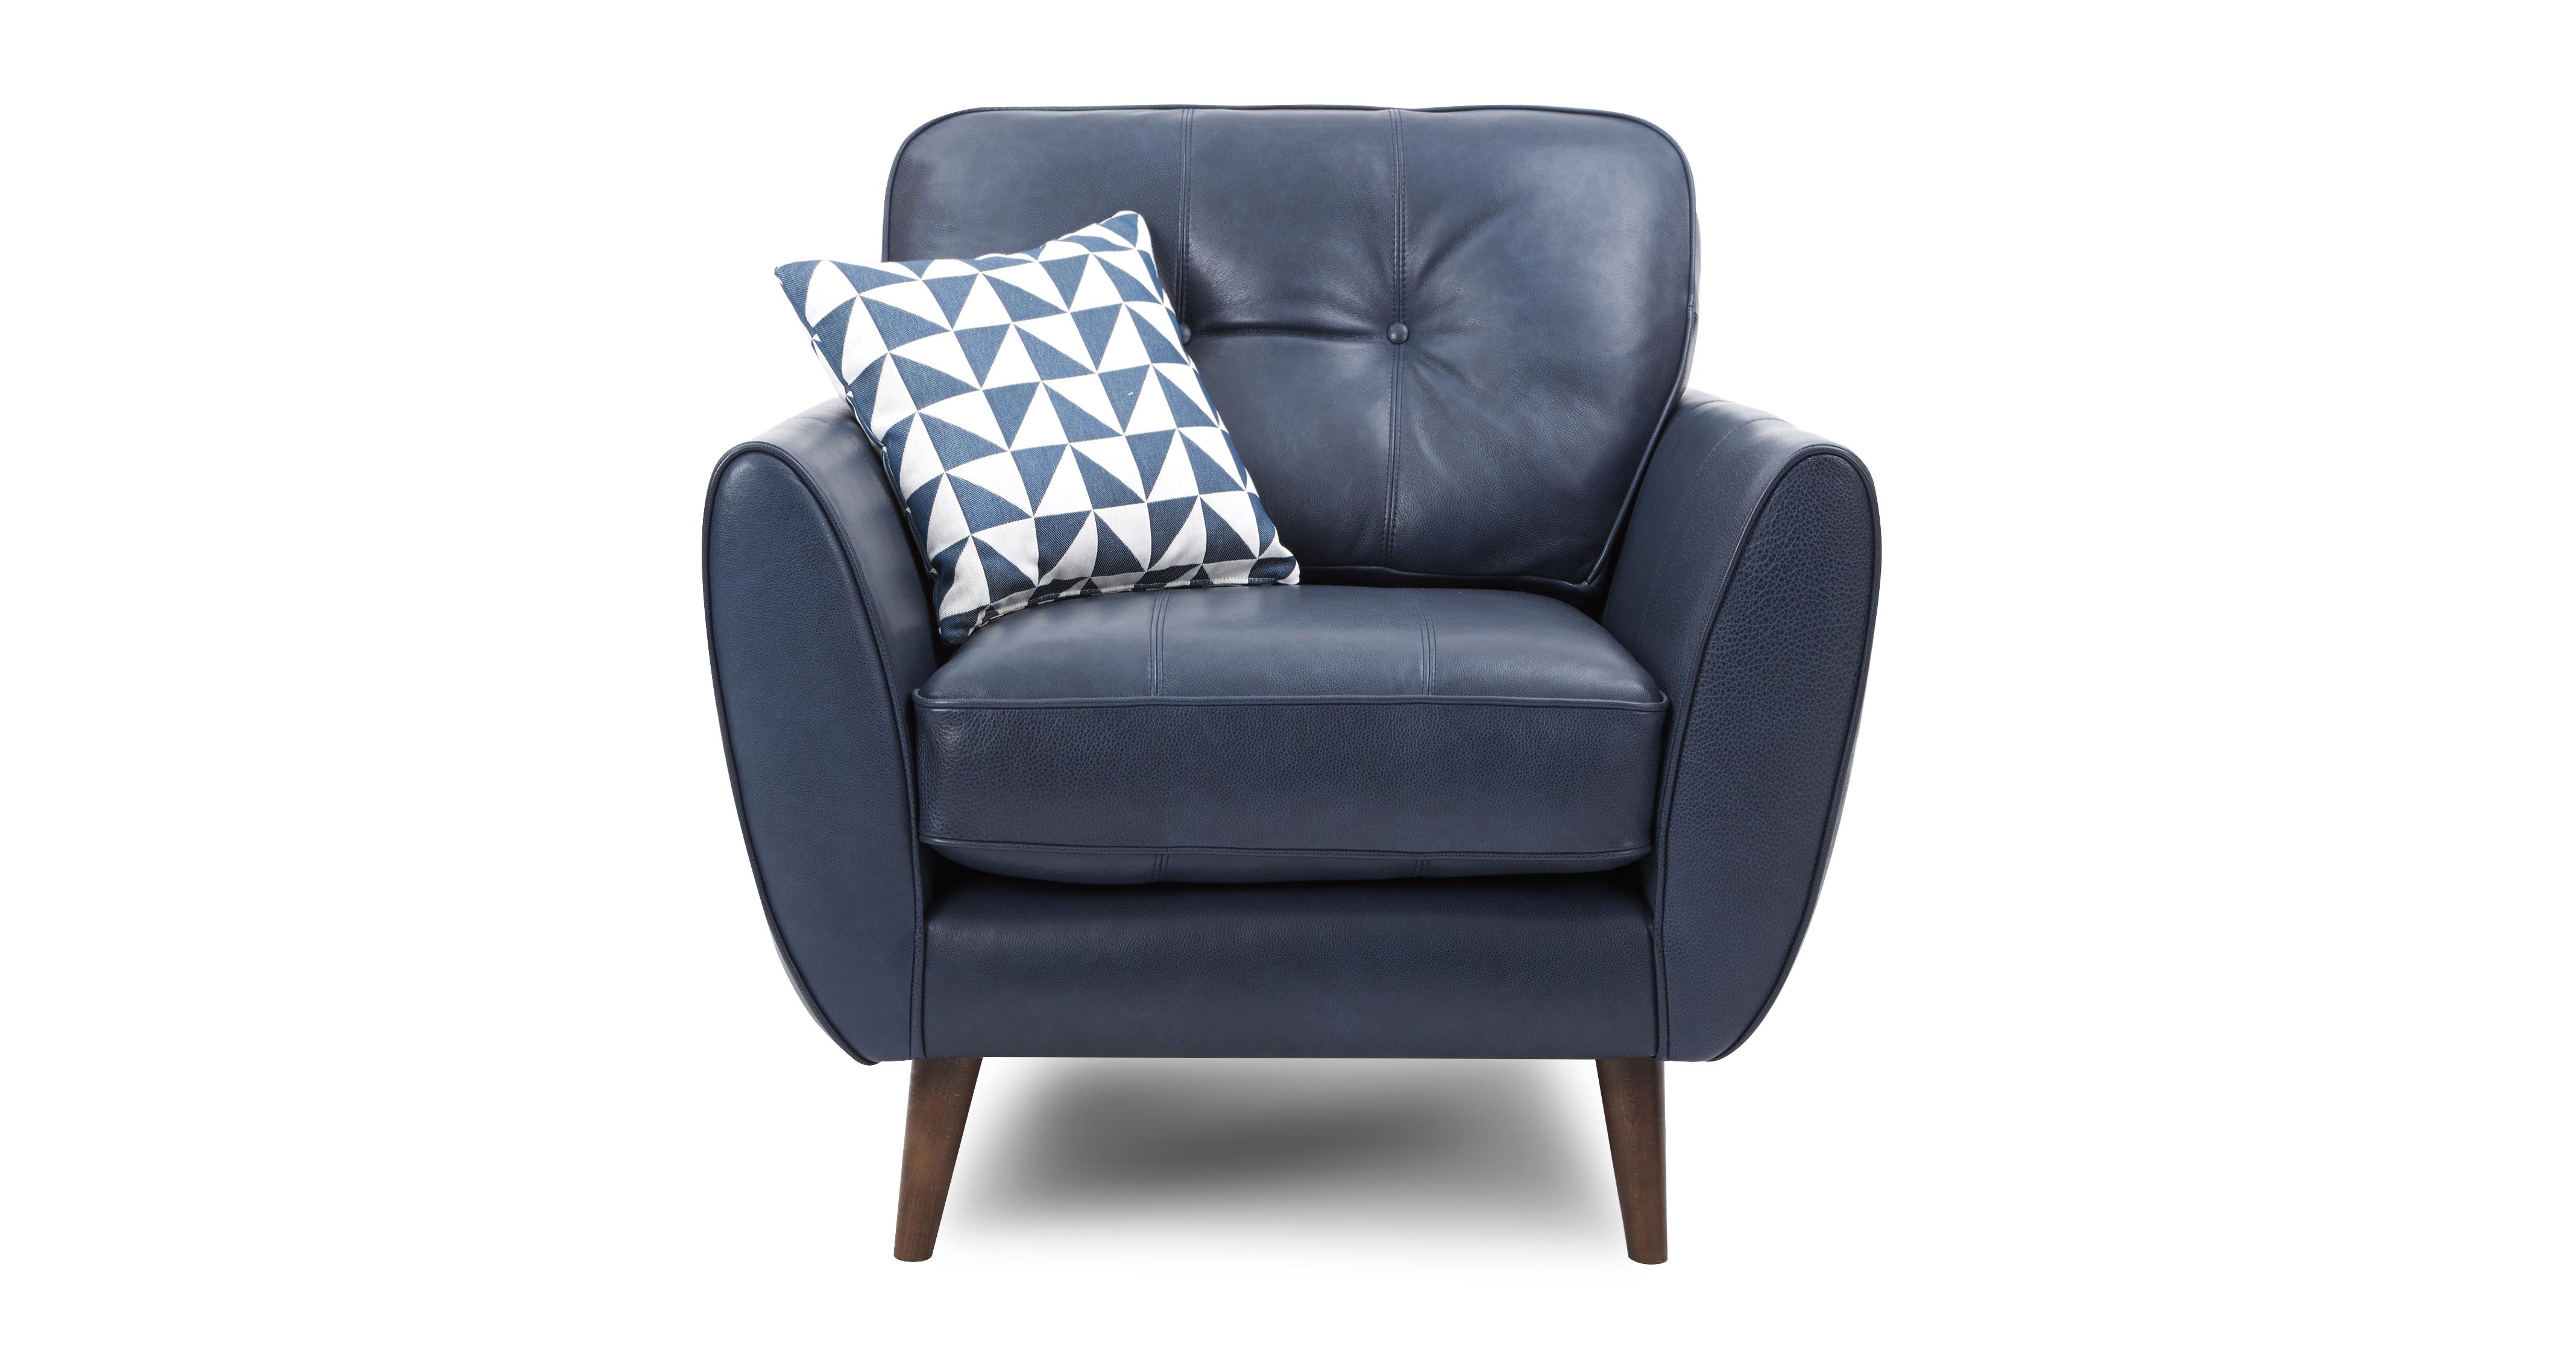 Zinc Leather Armchair, French Connection Leather Chair